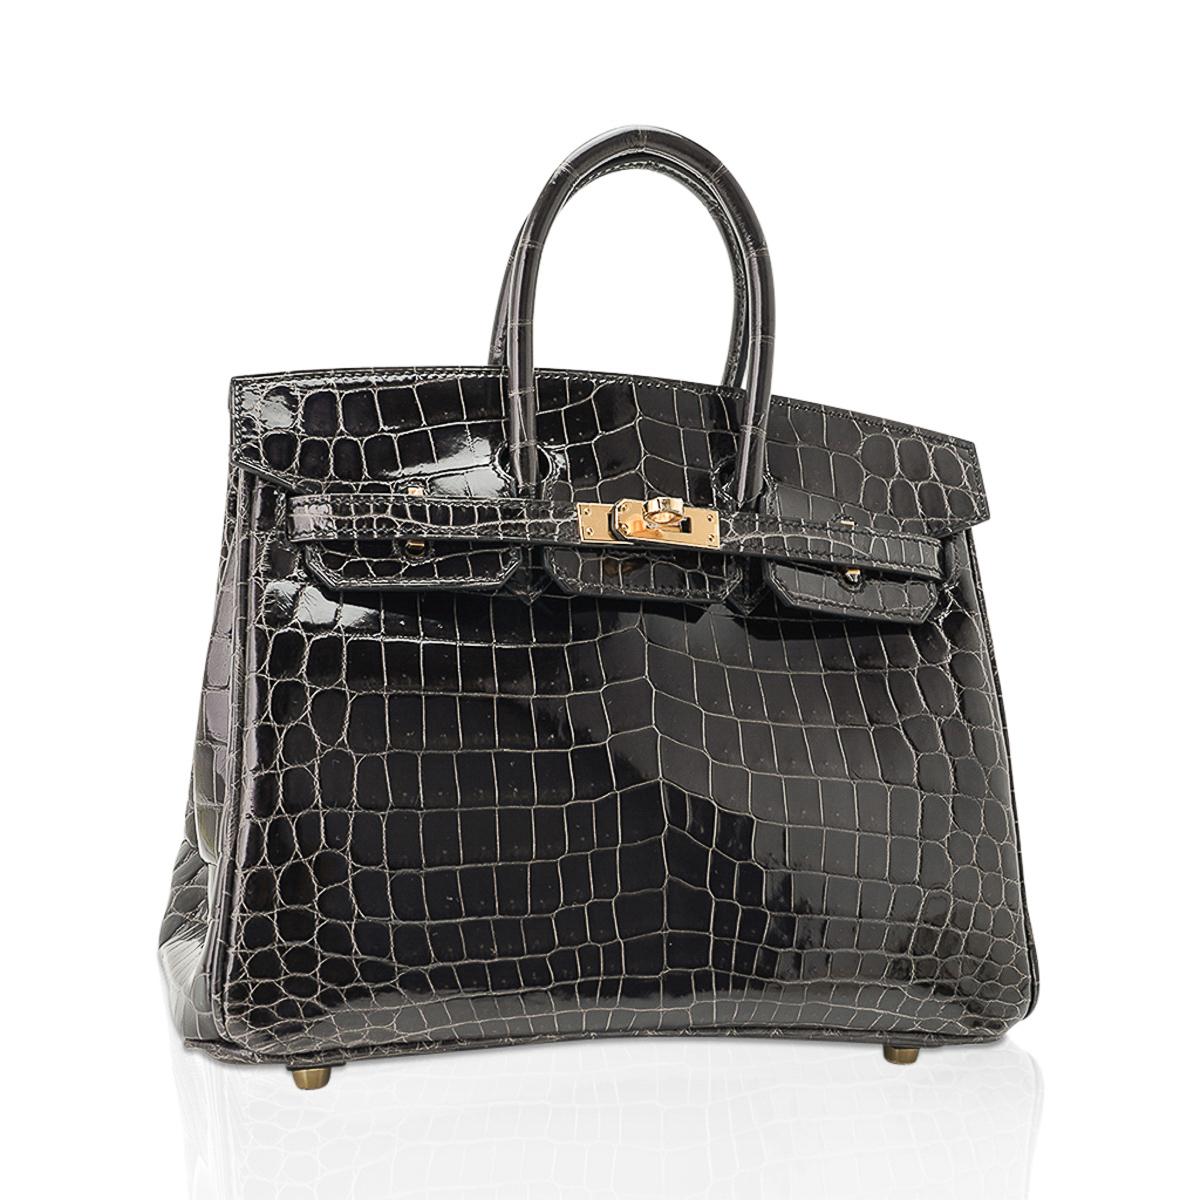 Mightychic offers an Hermes Birkin 25 bag featured in rich Graphite crocodile.
Lisse Crocodile has a lush shine with depth.
This rich dark gray is highlighted with the lighter hue between the scales with stunning effect.
Neutral and great for year